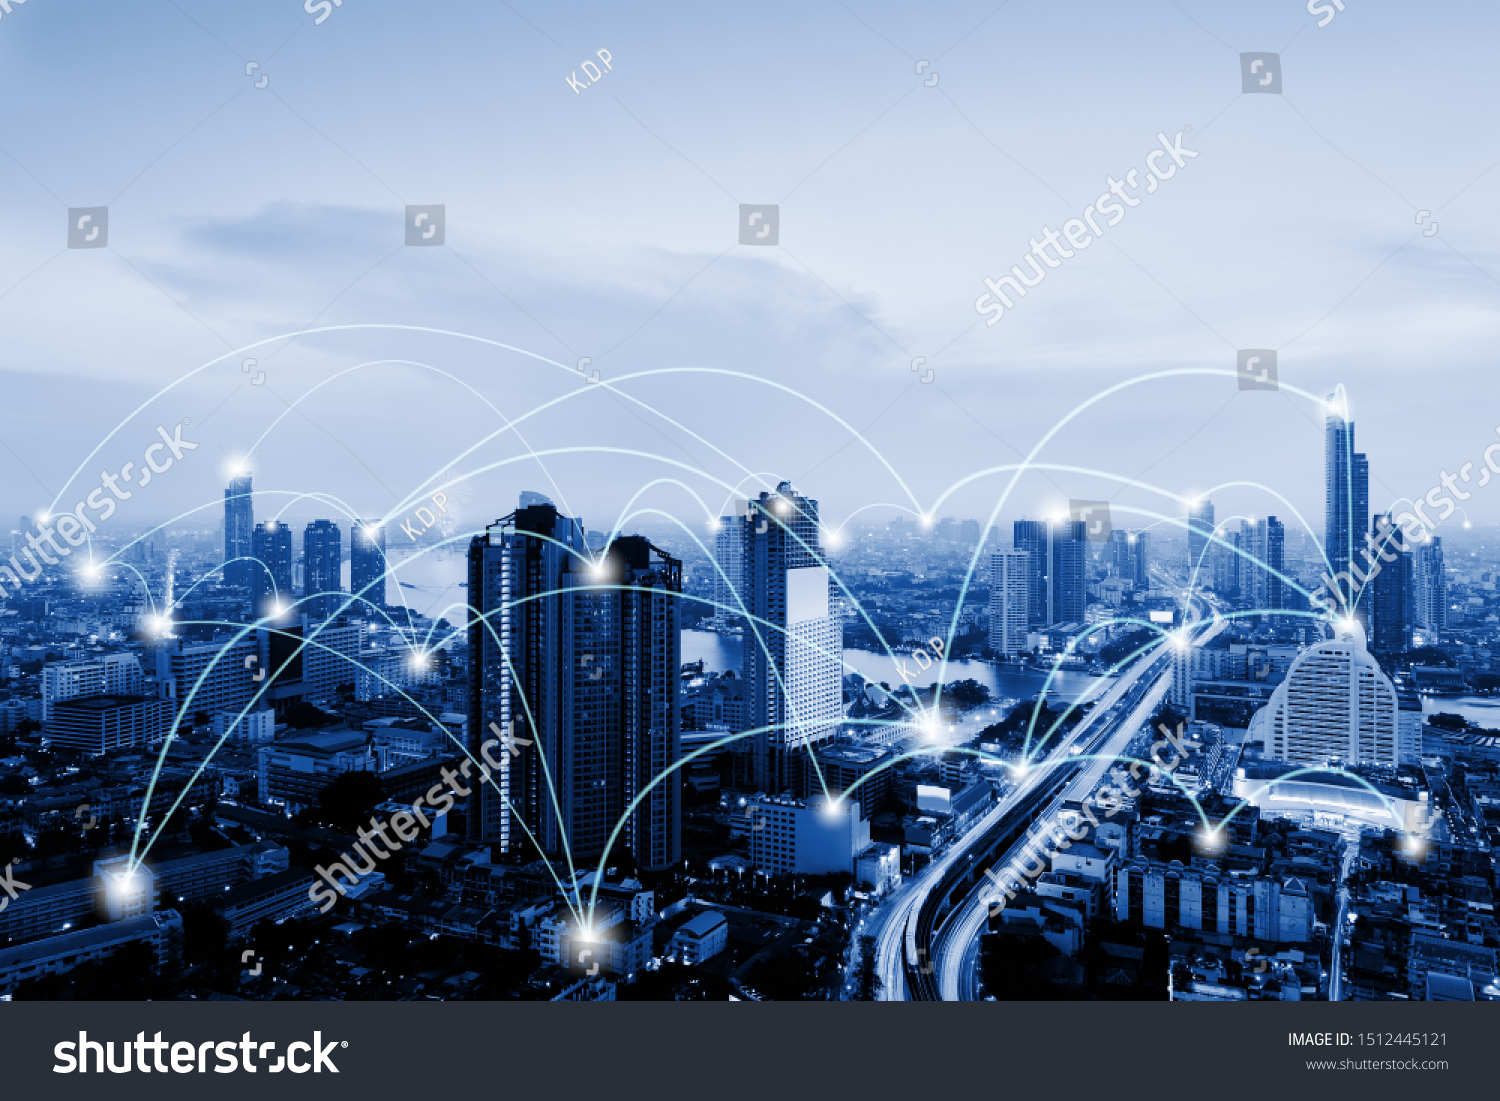 Network Telecommunication and Communication Connect Concept, Connection 5G Networking System of Infrastructure and Cityscape at Night Scenery. Technology Digital Connectivity and Information Transfer #1512445121